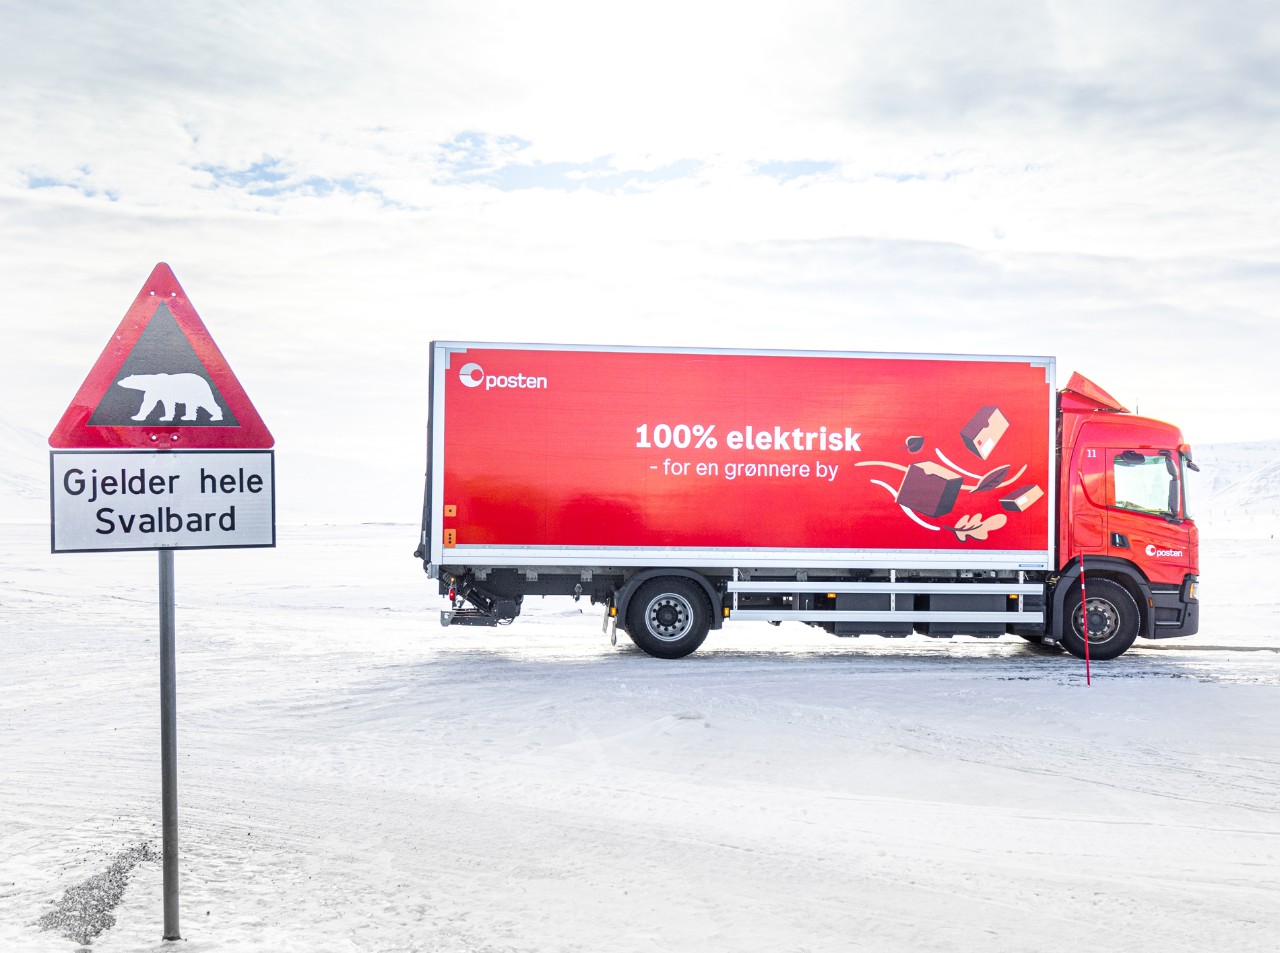 The world's northernmost electric Scania truck  